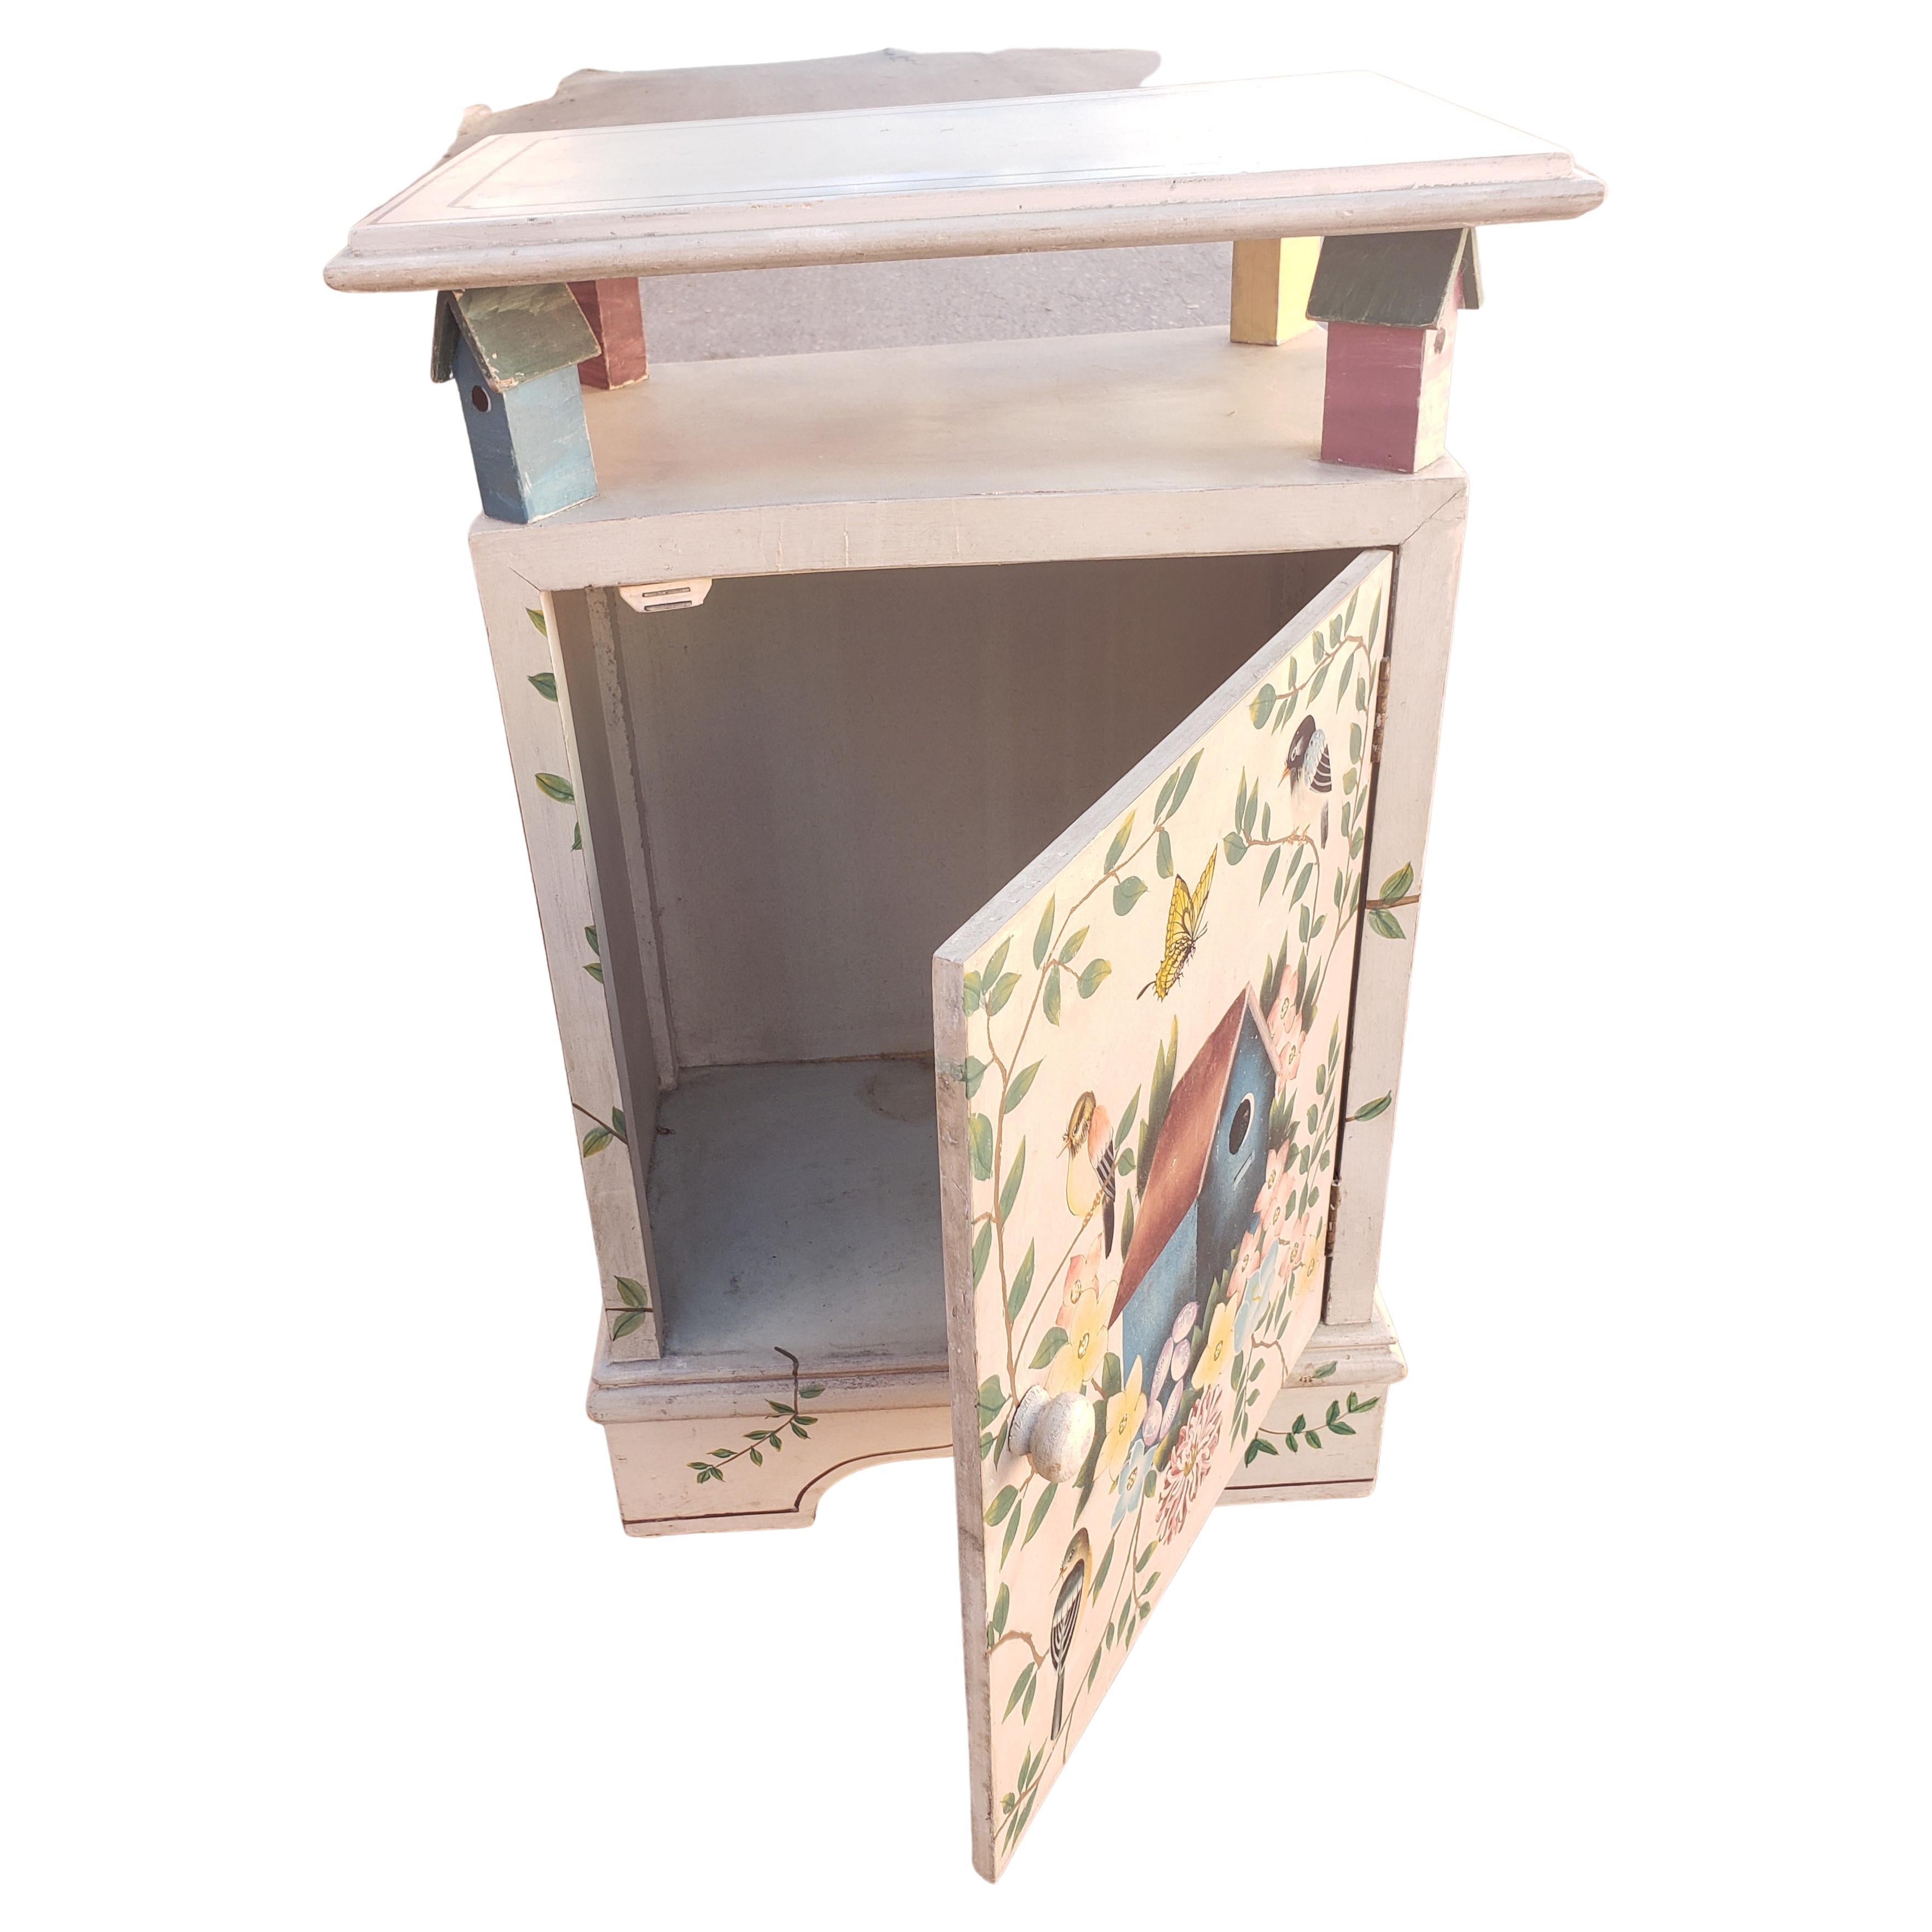 Hand painted vintage cabinet stand. Measures 19.75